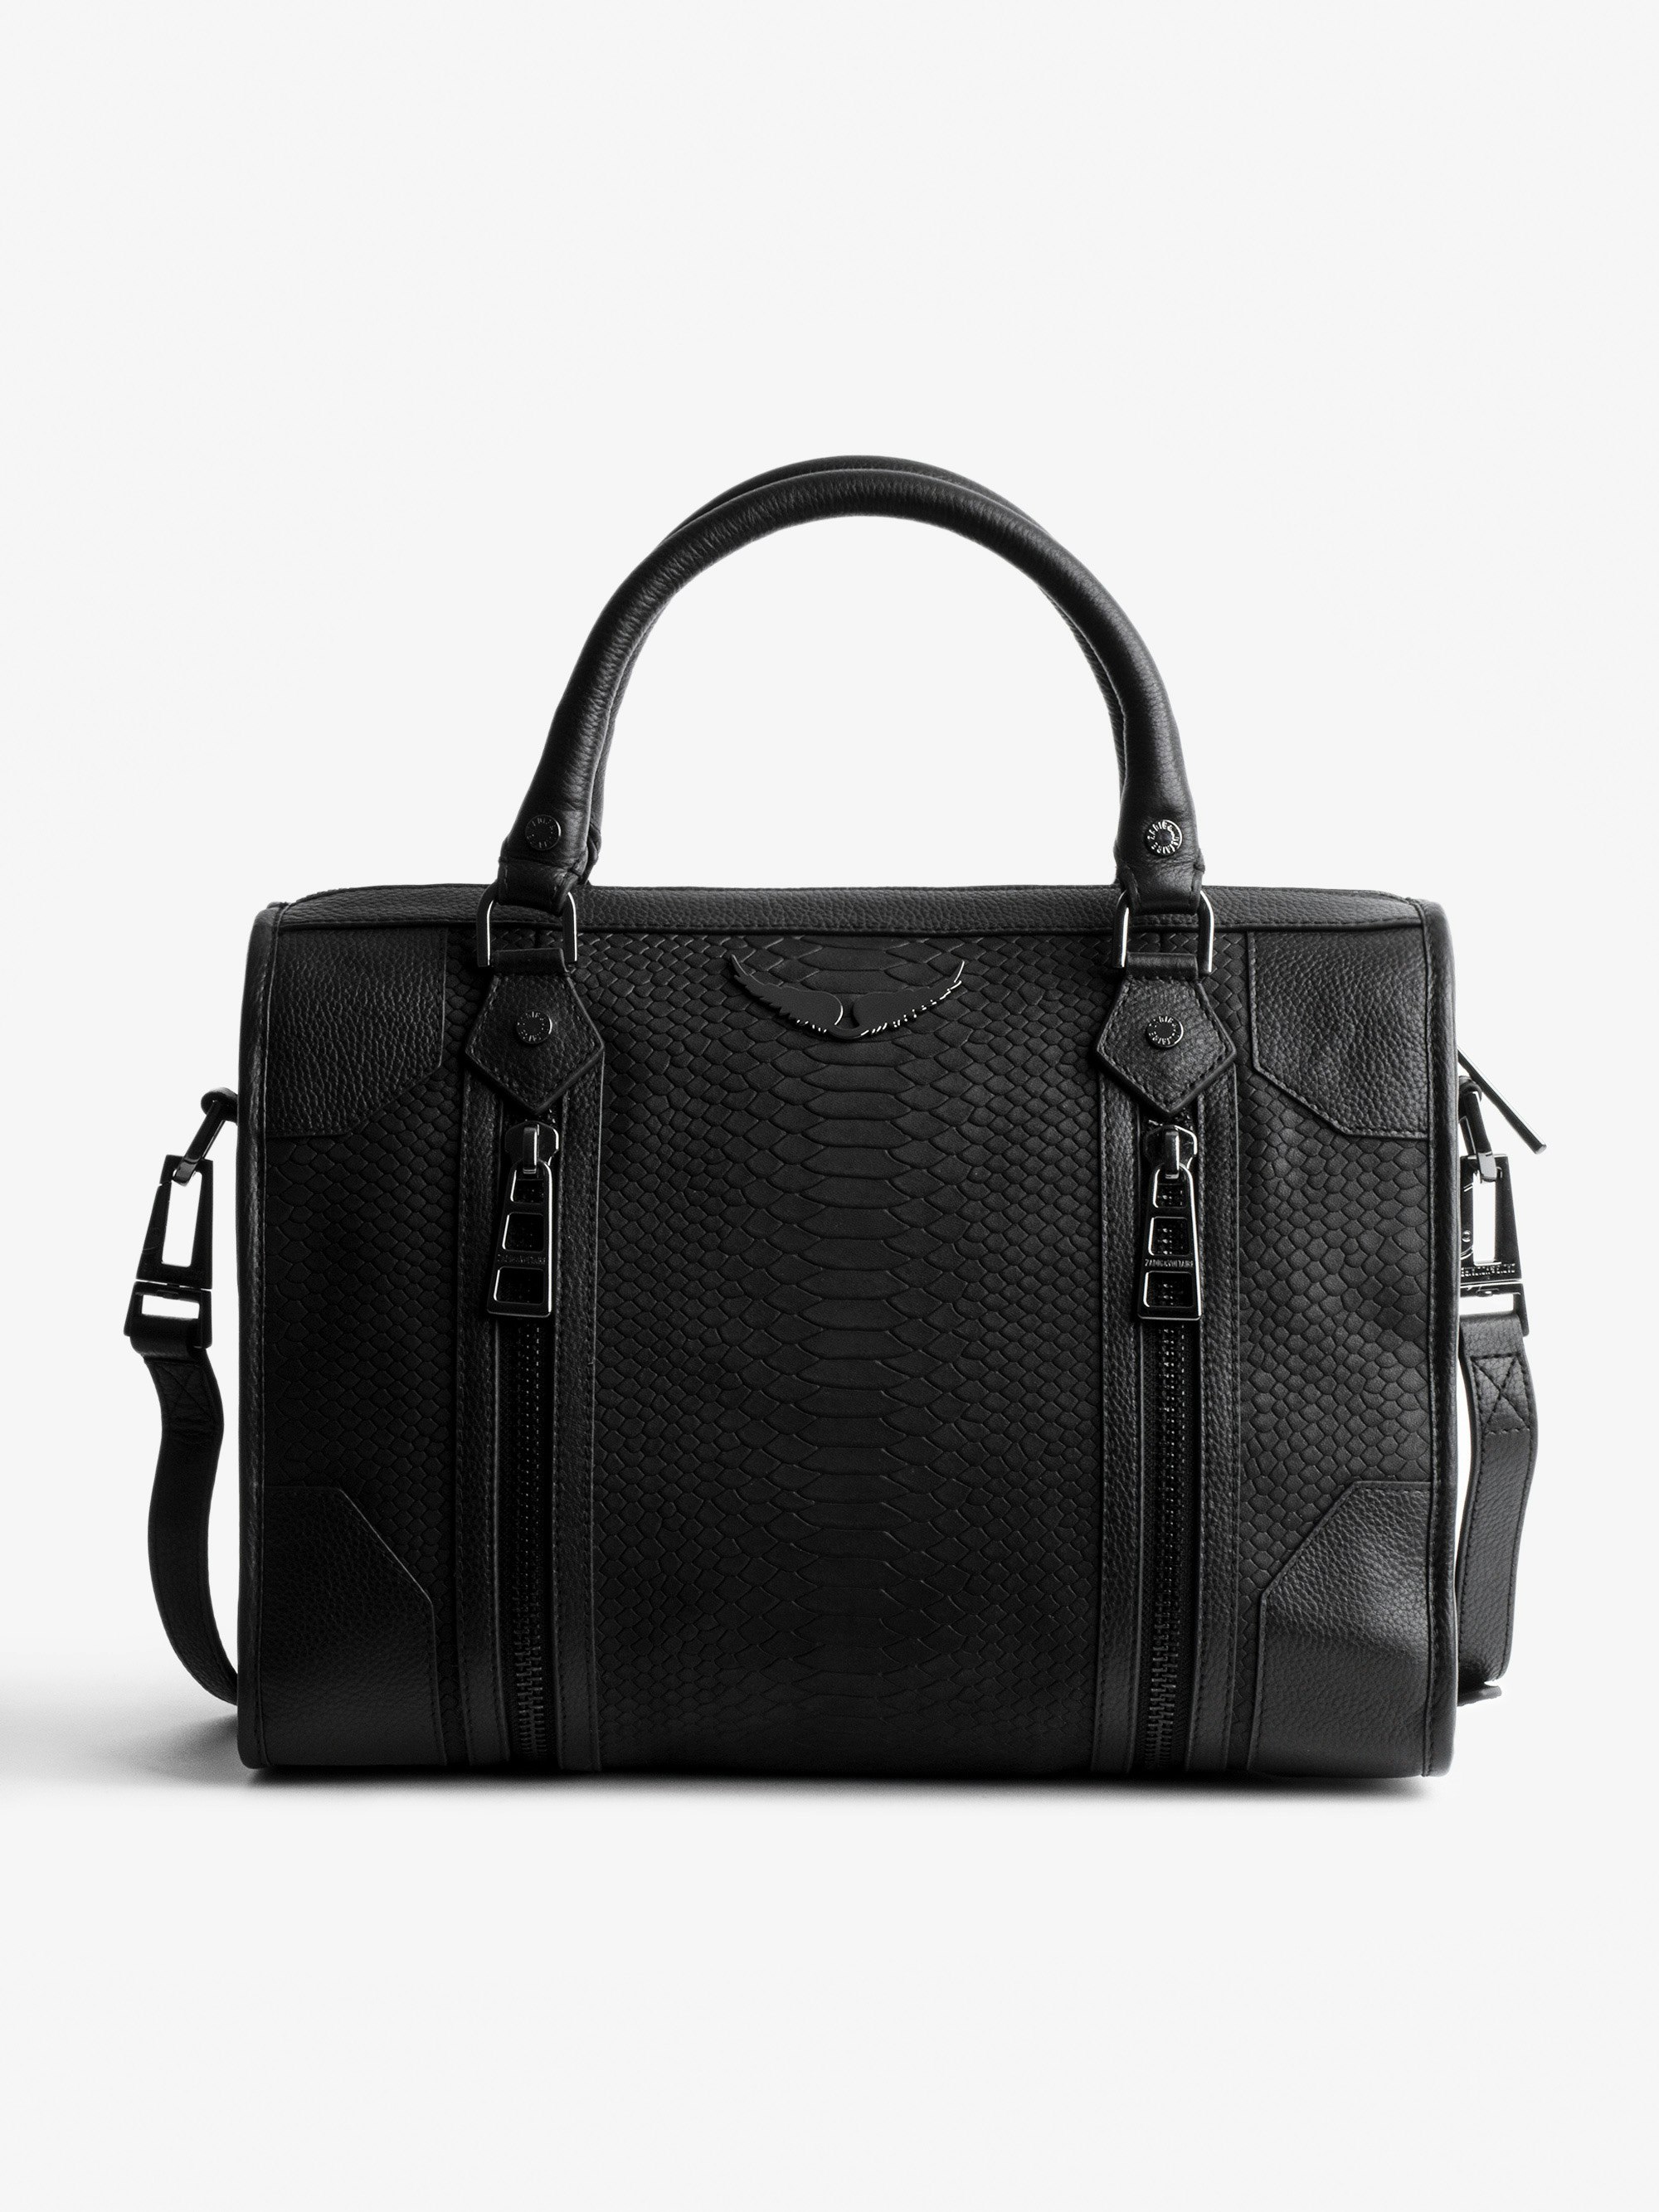 Sunny Medium #2 Soft Savage Bag - Women's Voltaire black python-effect leather bag with handle and shoulder strap